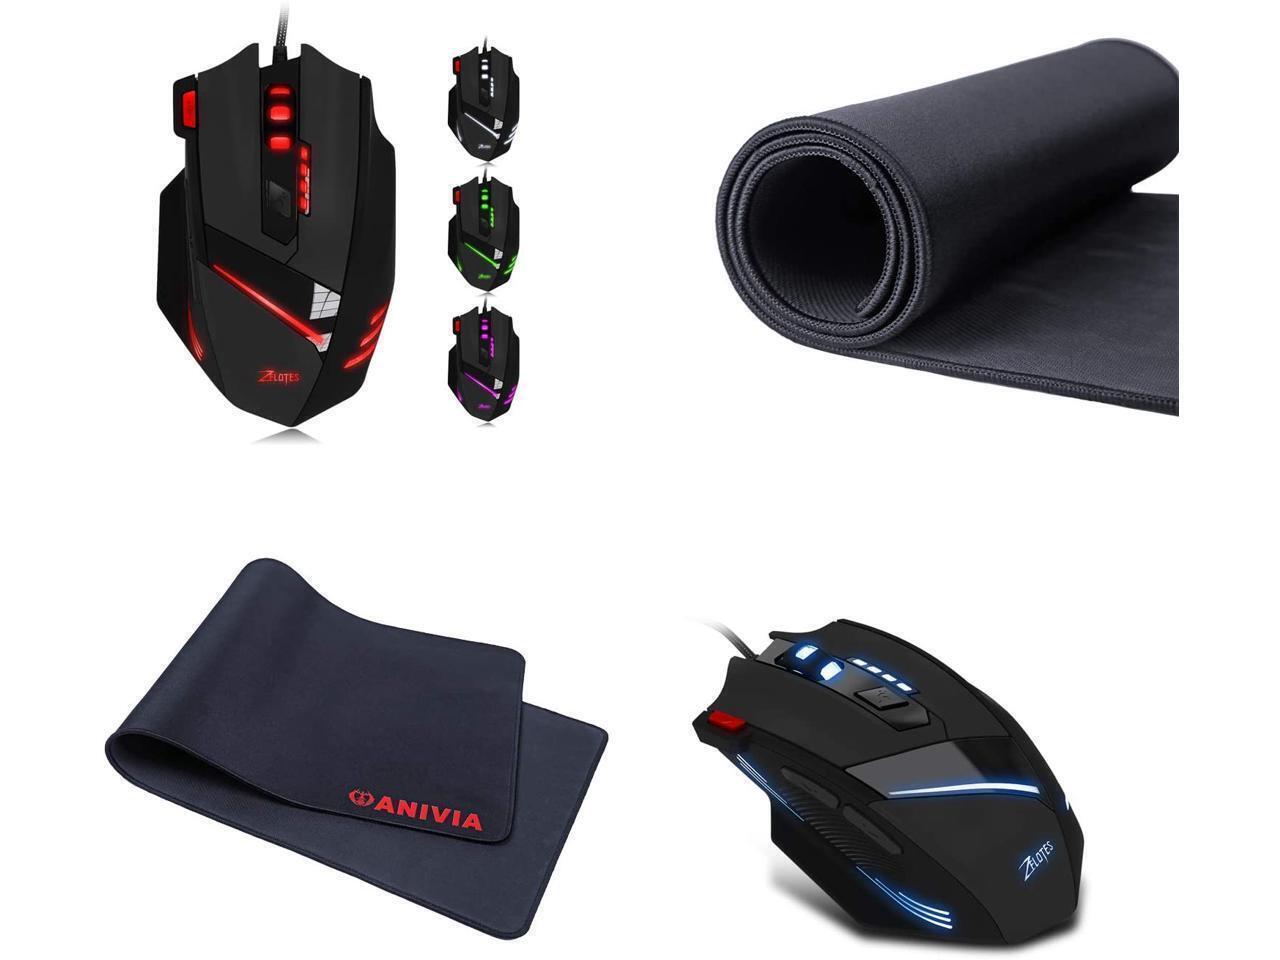 XXL Mouse Pad & Gaming Mouse Set,Desk Pad PC Table Mat with Anti-Slip Rubber